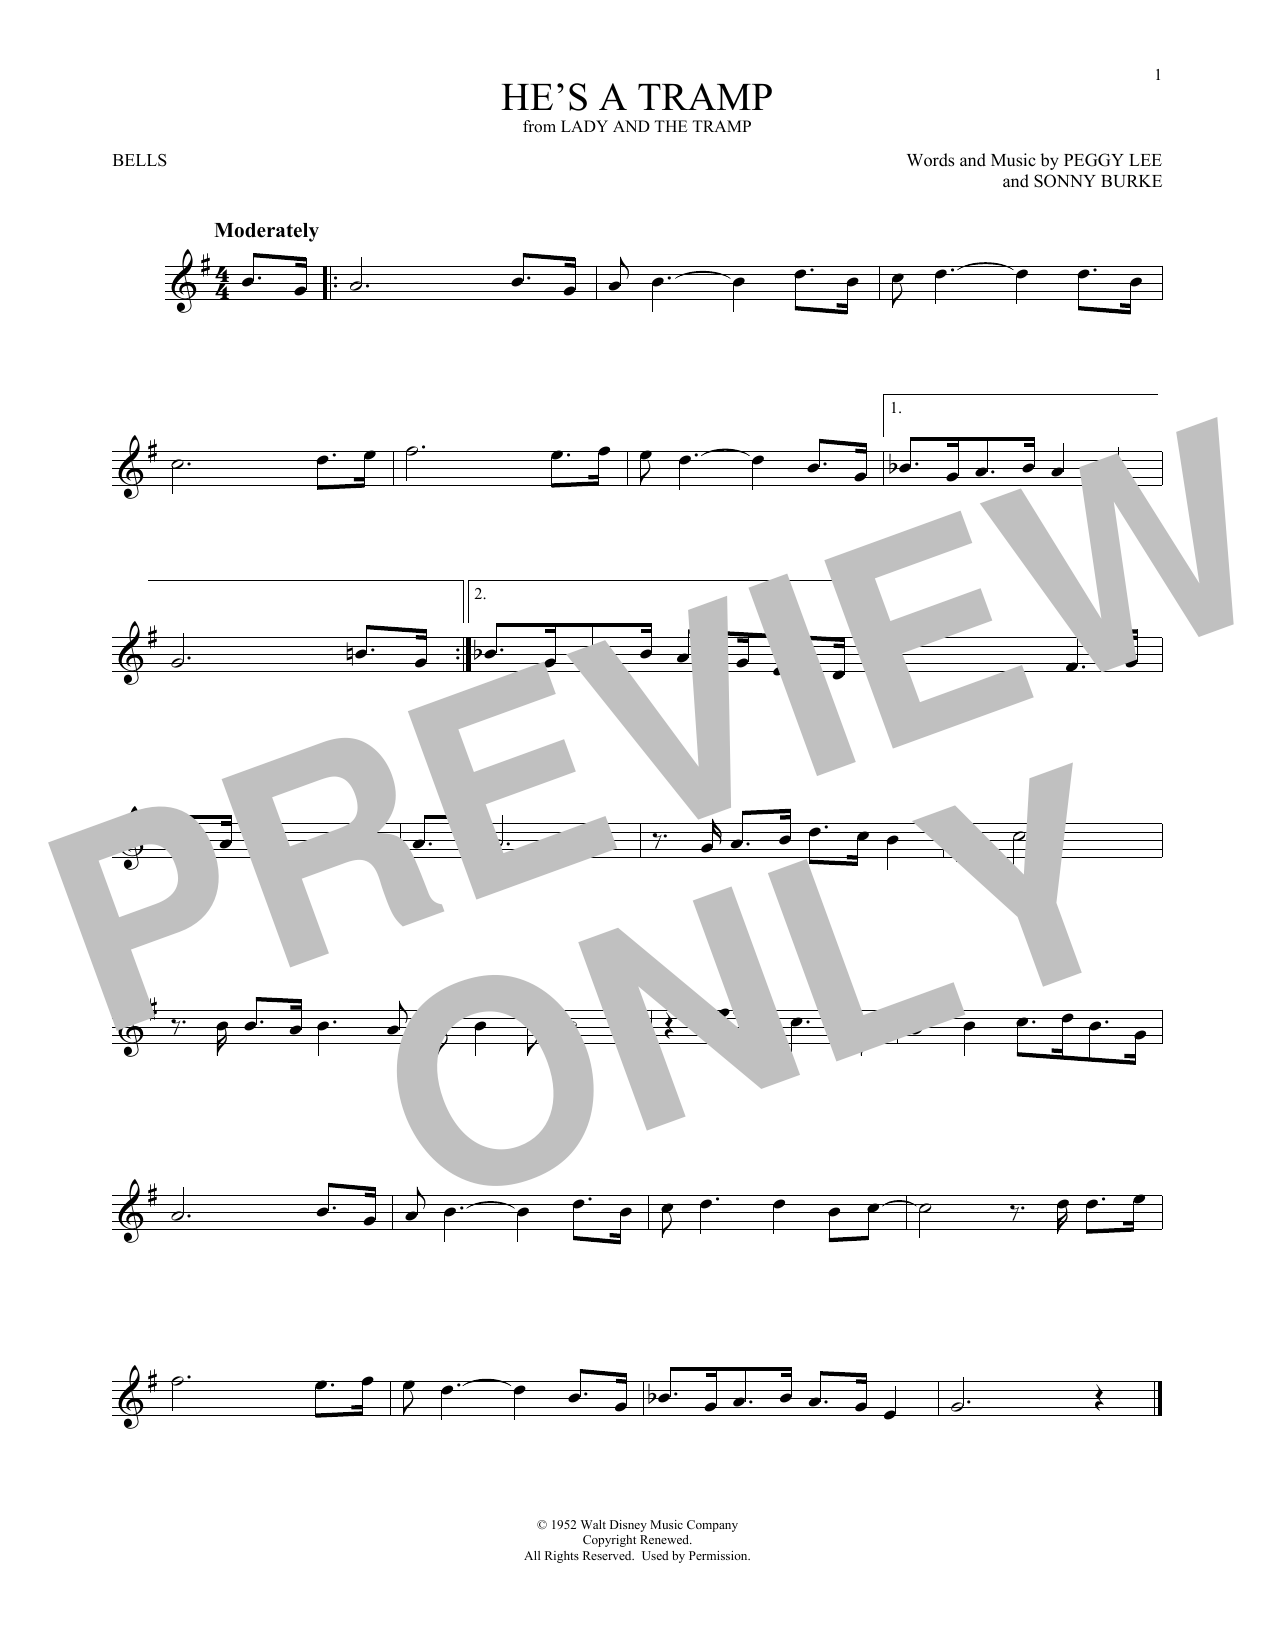 Download Peggy Lee He's A Tramp (from Lady And The Tramp) Sheet Music